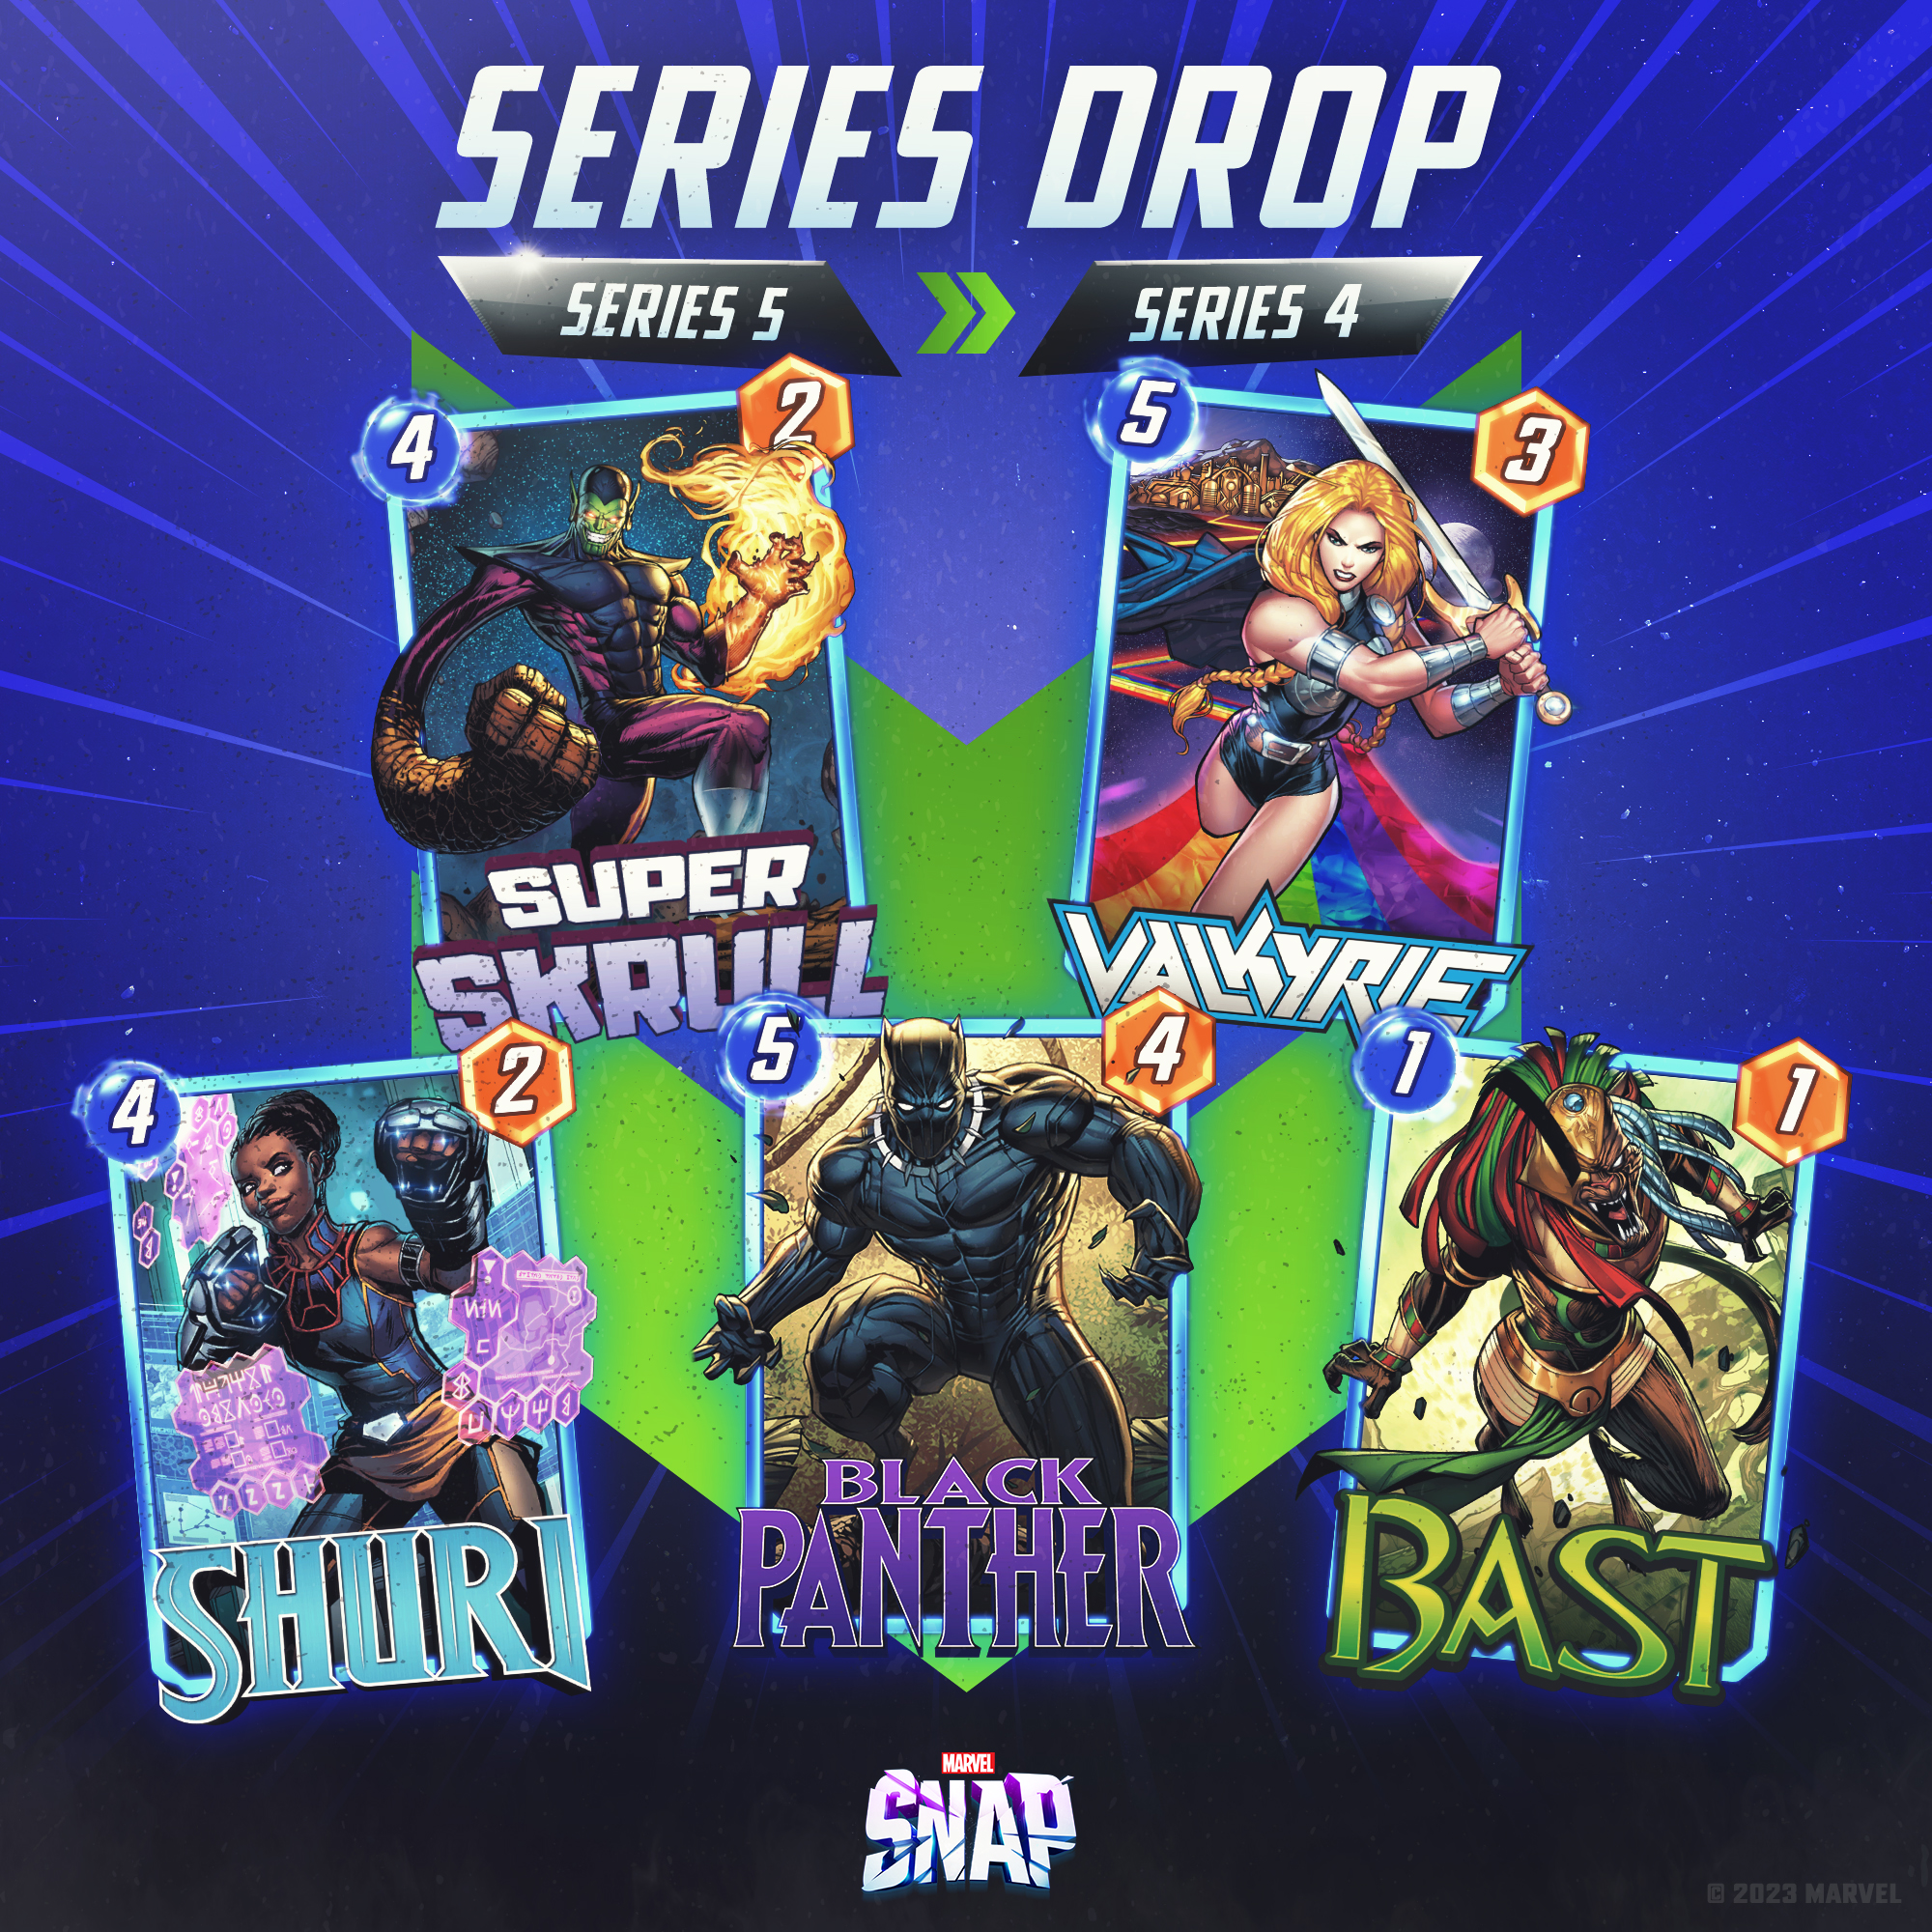 MARVEL SNAP on X: MARVEL SNAP's next Series Drop is around the corner. See  which cards will move from Series 5 to 4 and from Series 4 to 3 in our  upcoming